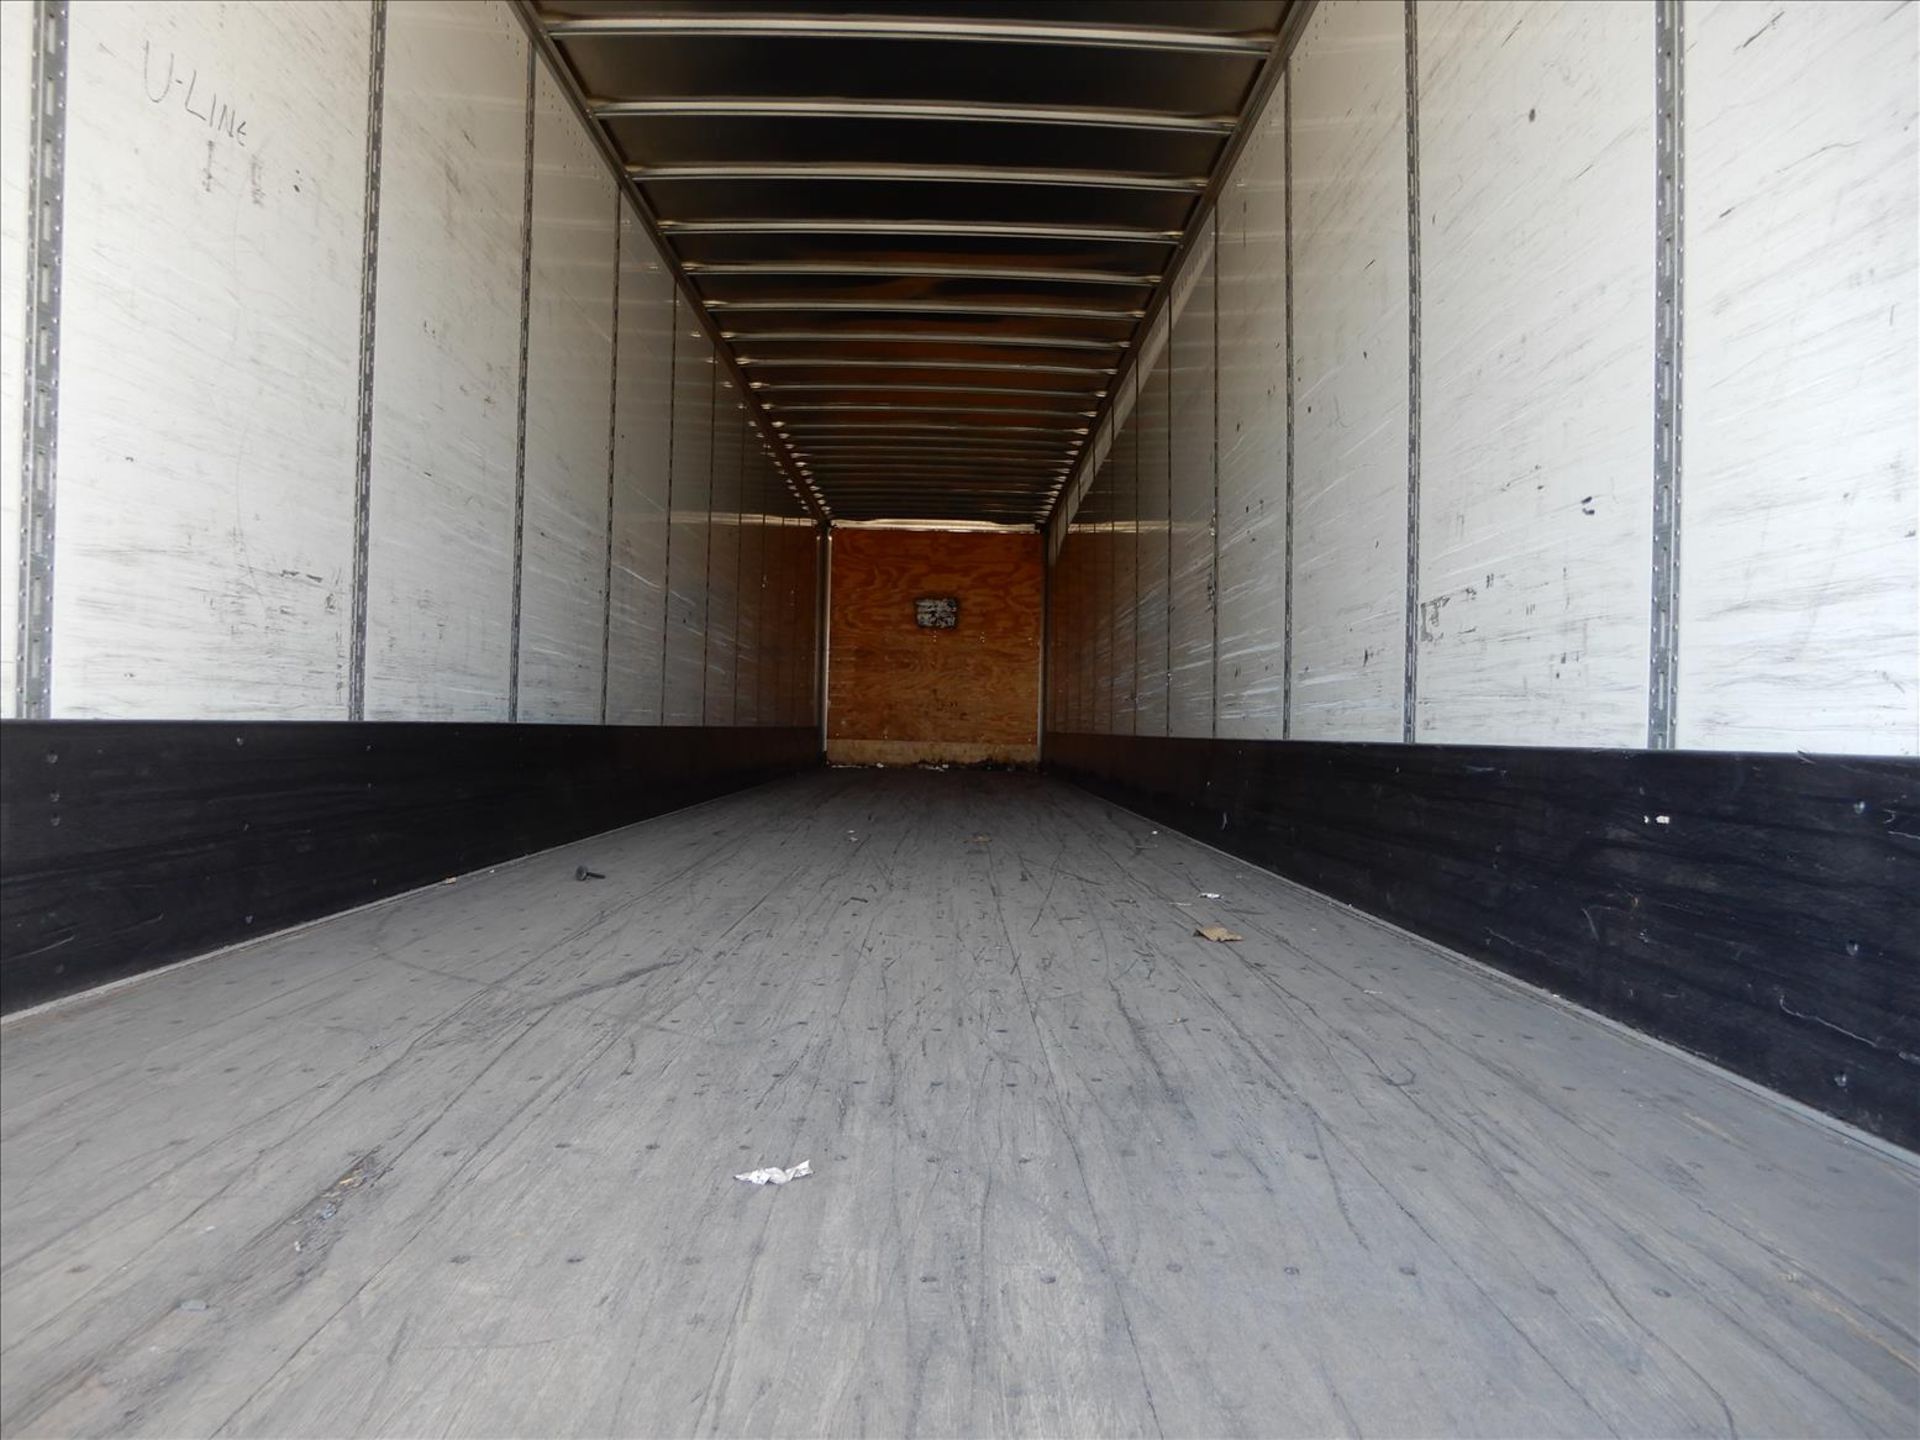 2012 Vanguard Trailer - Located in Indianapolis, IN - Image 25 of 29